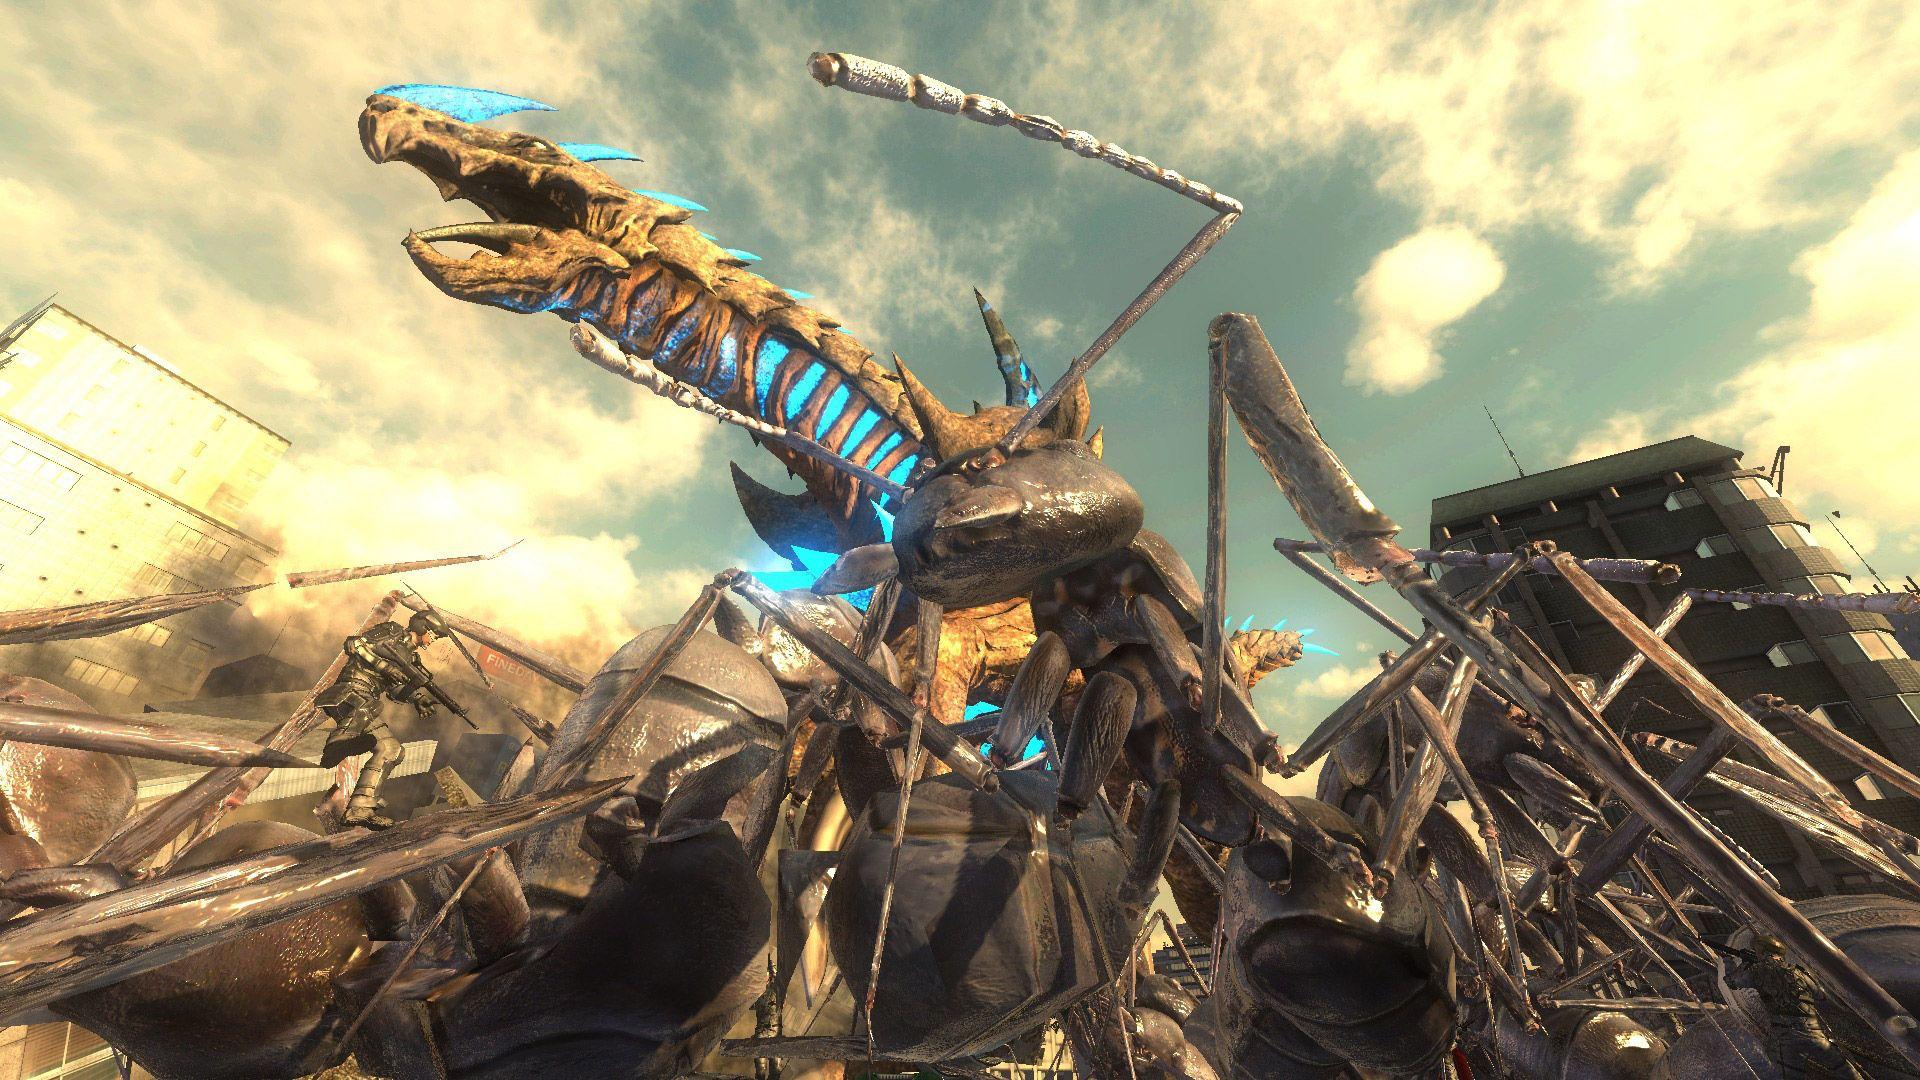 Earth Defense Force 4.1: Best Inferno Missions For Weapon Farming